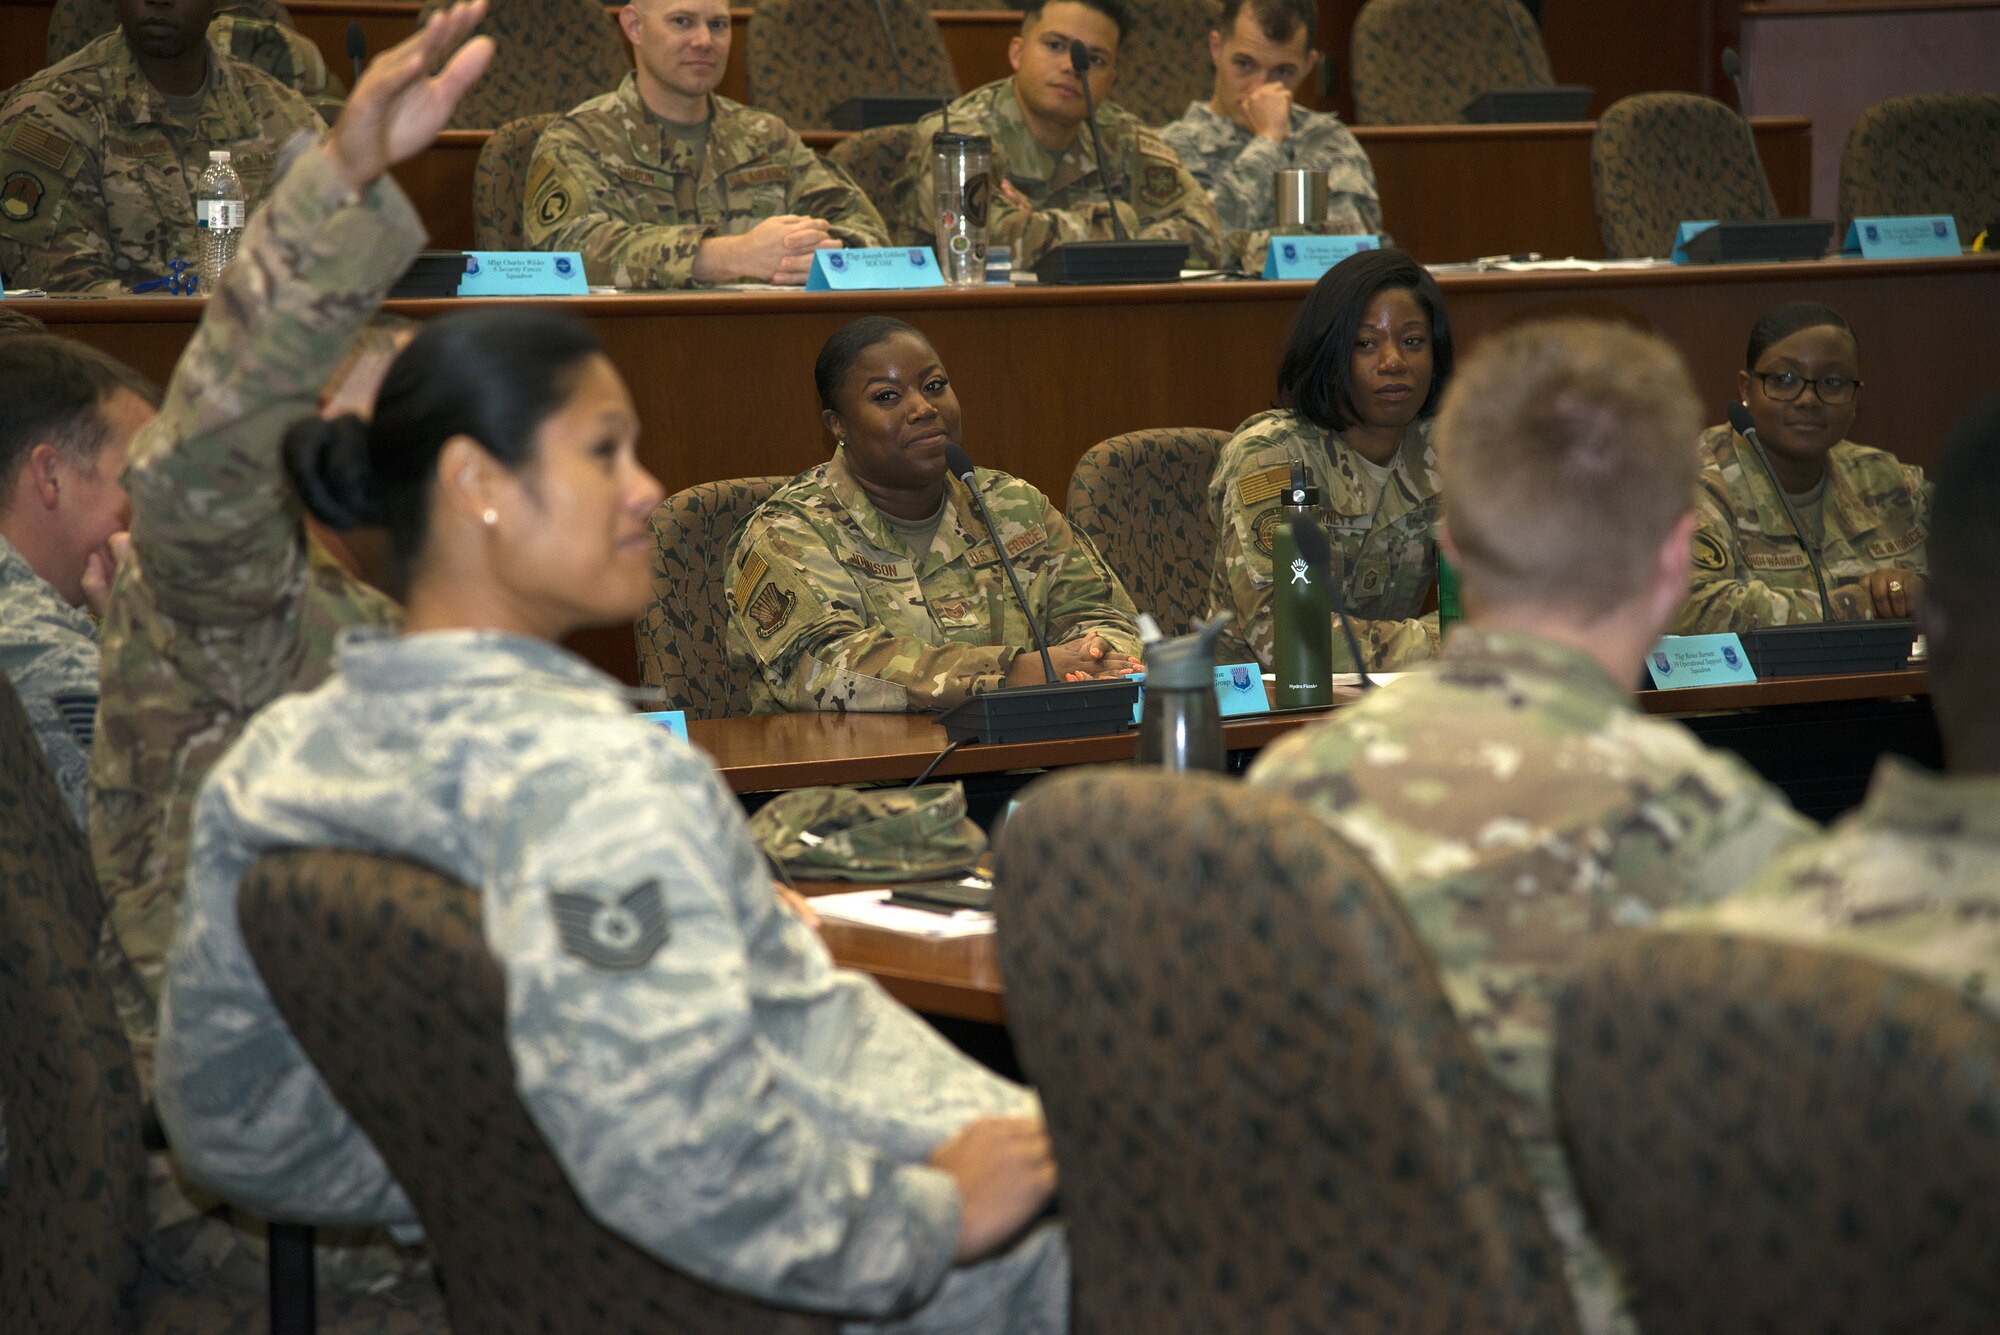 U.S. Air Force Tech. Sgt. Katrina Johnson, 6th Mission Support Group resource advisor, and surrounding students listen to a fellow Master Sgt. select during the SNCO Professional Enhancement Seminar at MacDill Air Force Base, Fla., Aug. 2, 2019.  This professional enhancement seminar is a week-long, discussion-led training course that prepares Airmen for their new SNCO responsibilities.